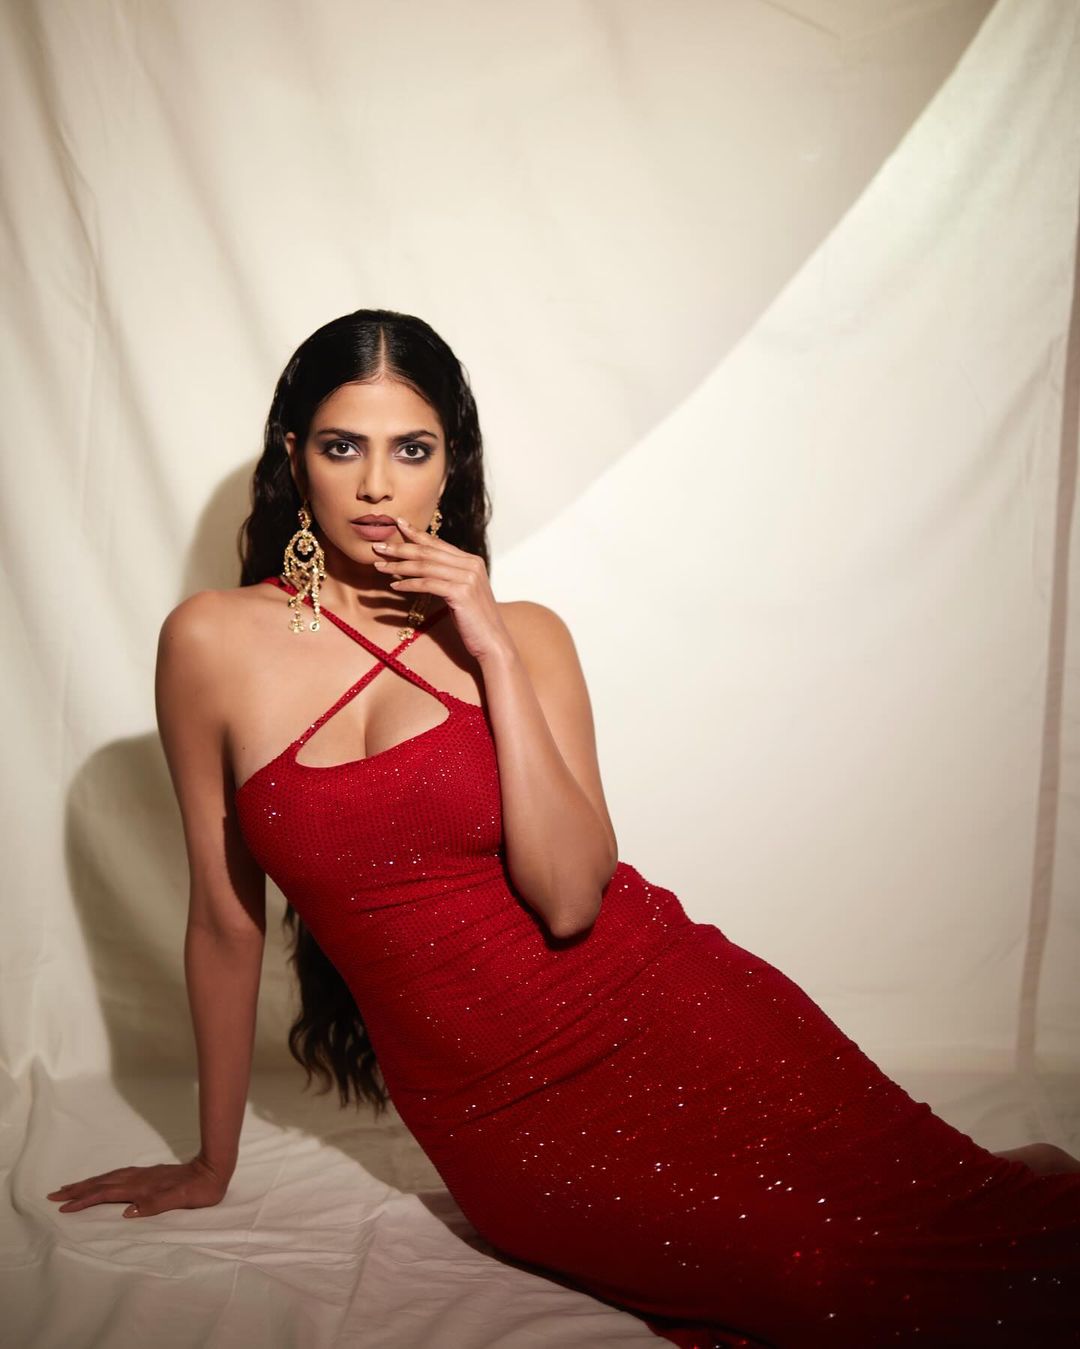 Actress malavika mohanan is going crazy with her looks-Actressmalavika Photos,Spicy Hot Pics,Images,High Resolution WallPapers Download